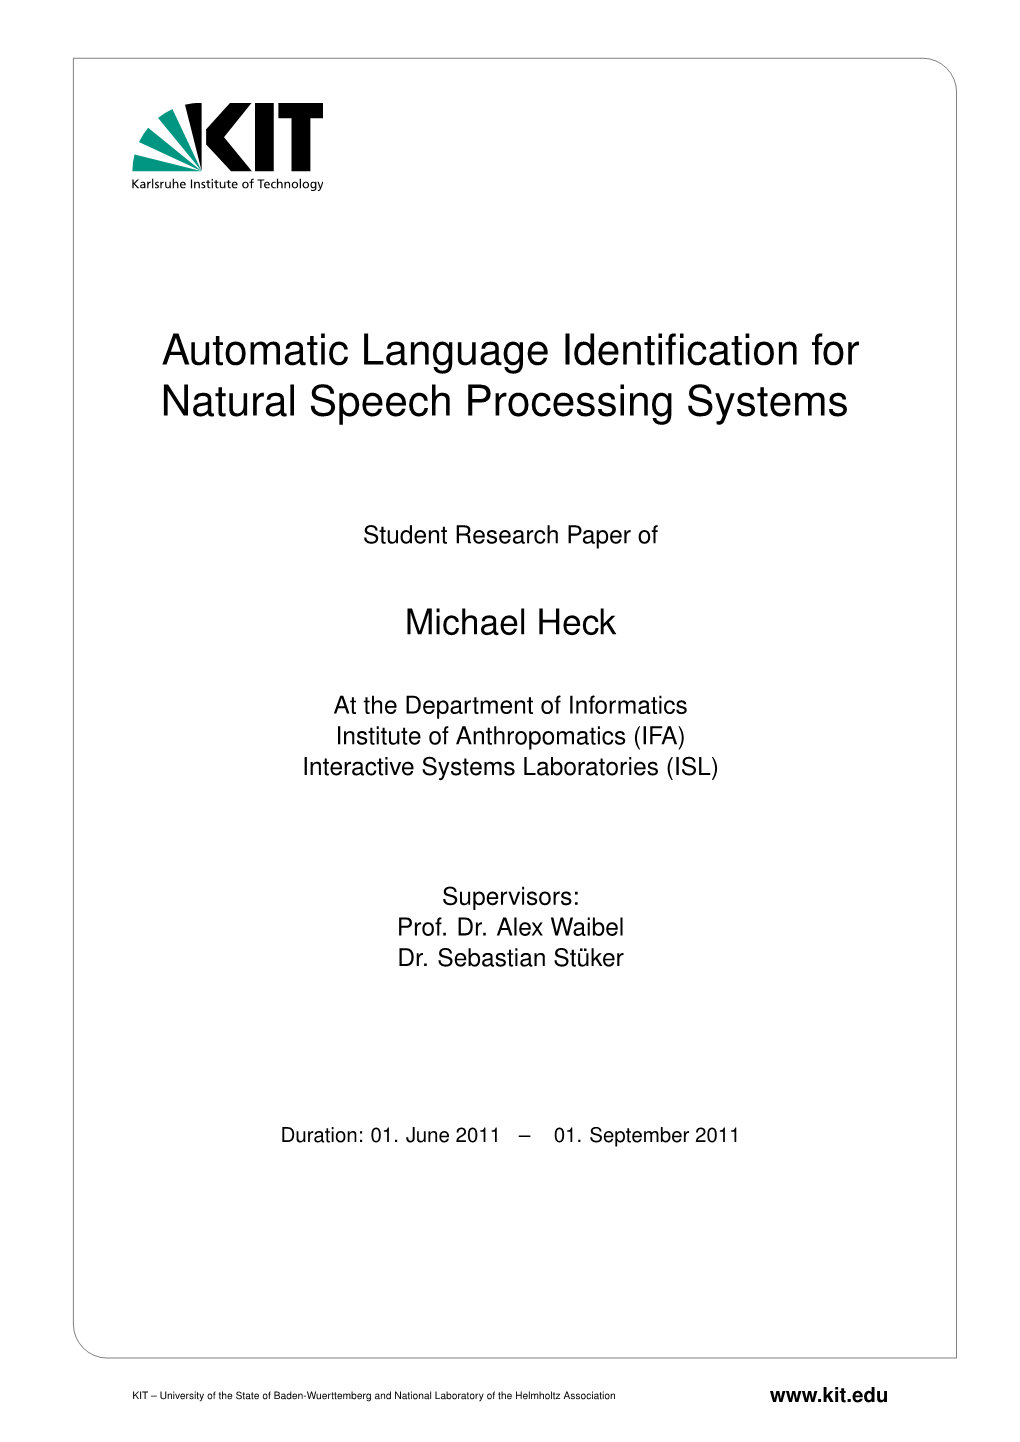 Automatic Language Identification for Natural Speech Processing Systems